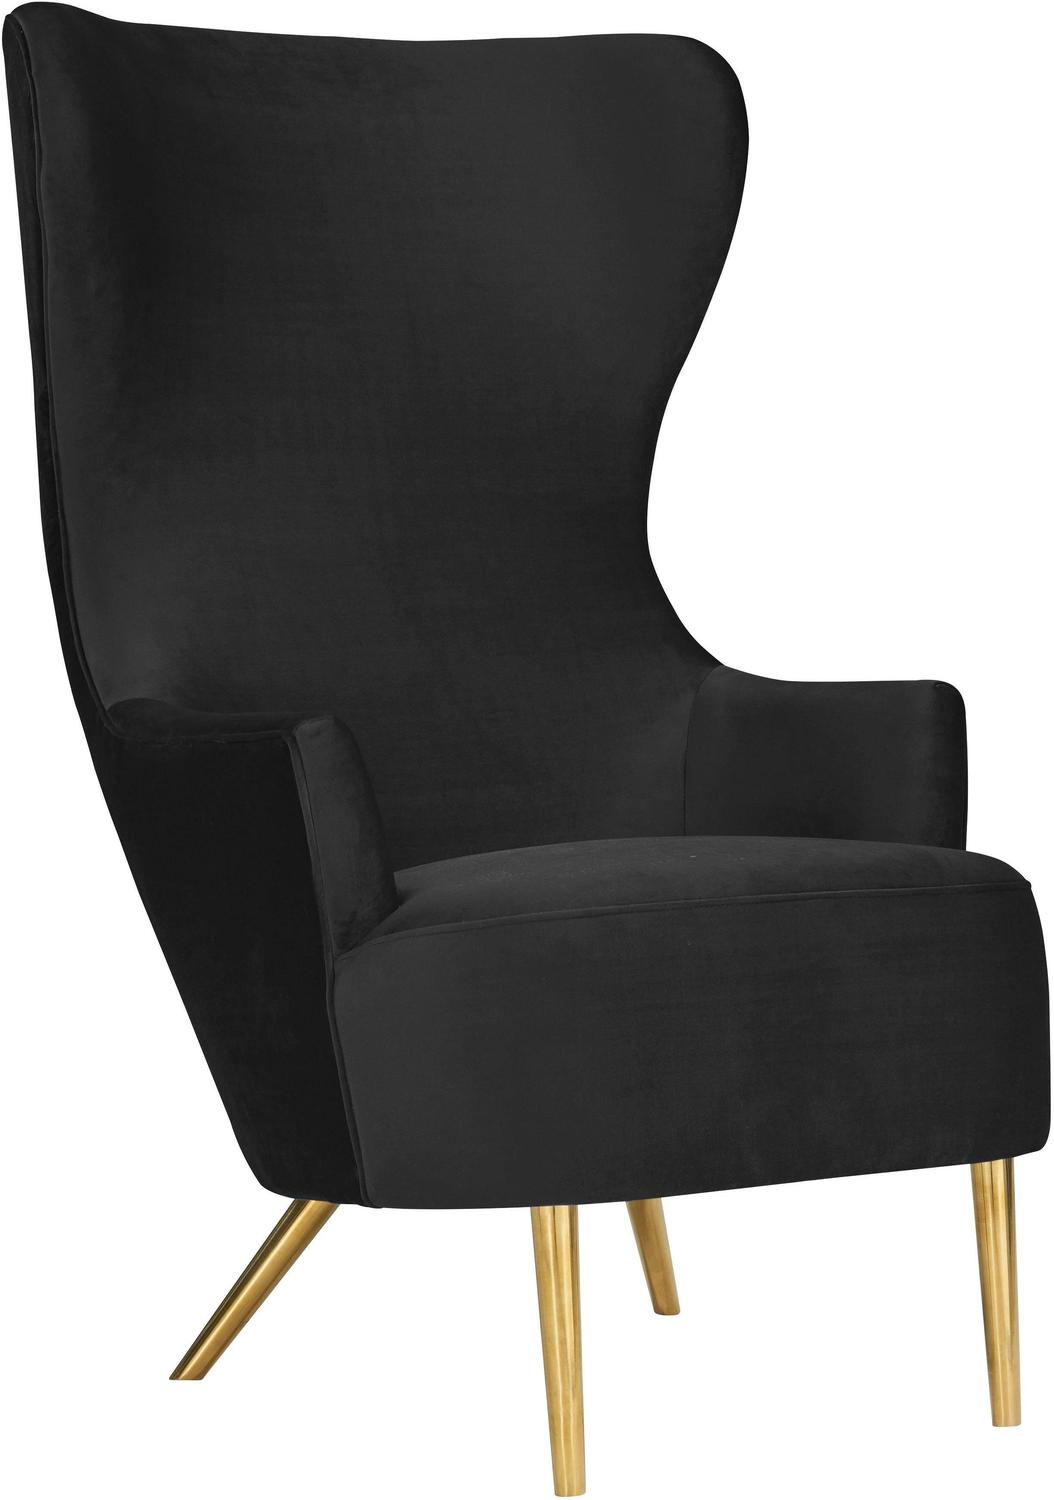  Contemporary Design Furniture Accent Chairs Chairs Black